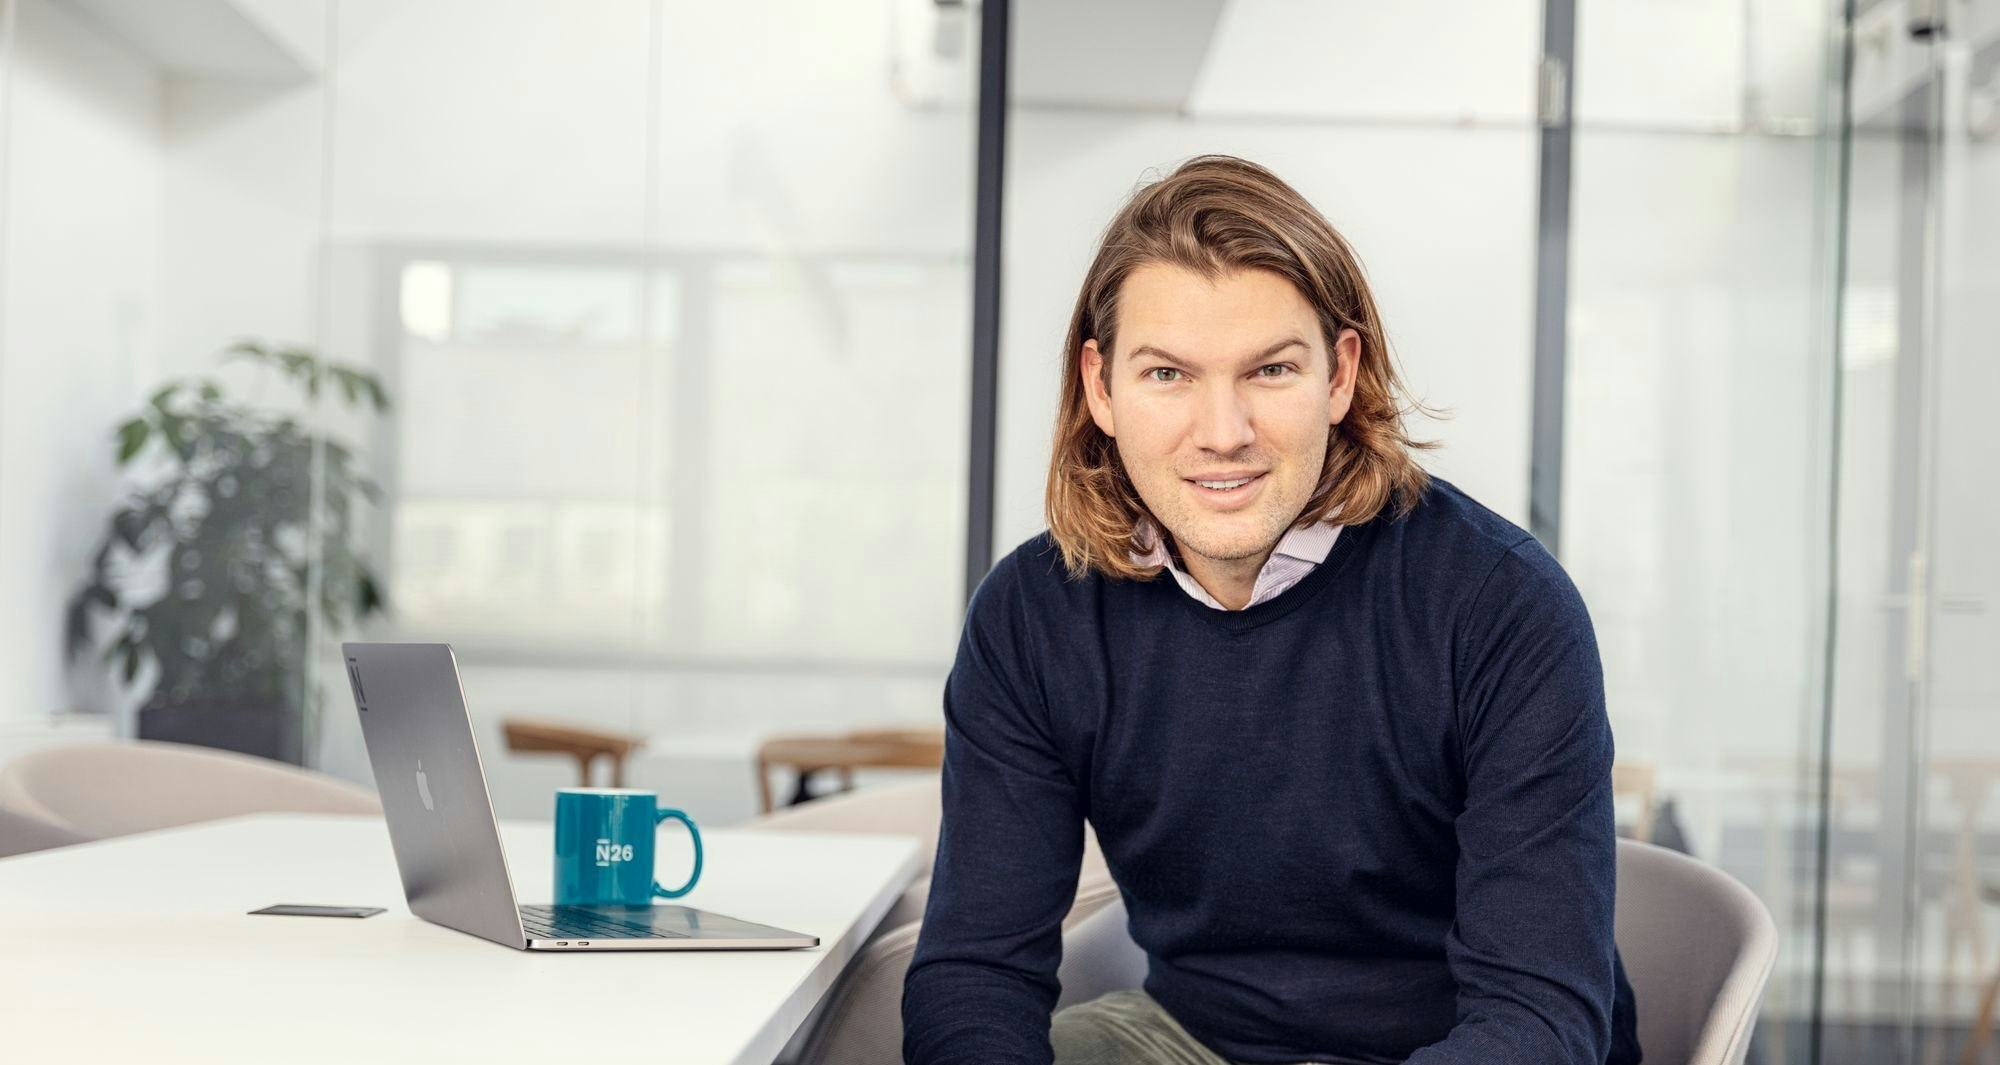 An image of N26 CEO Valentin Stalf